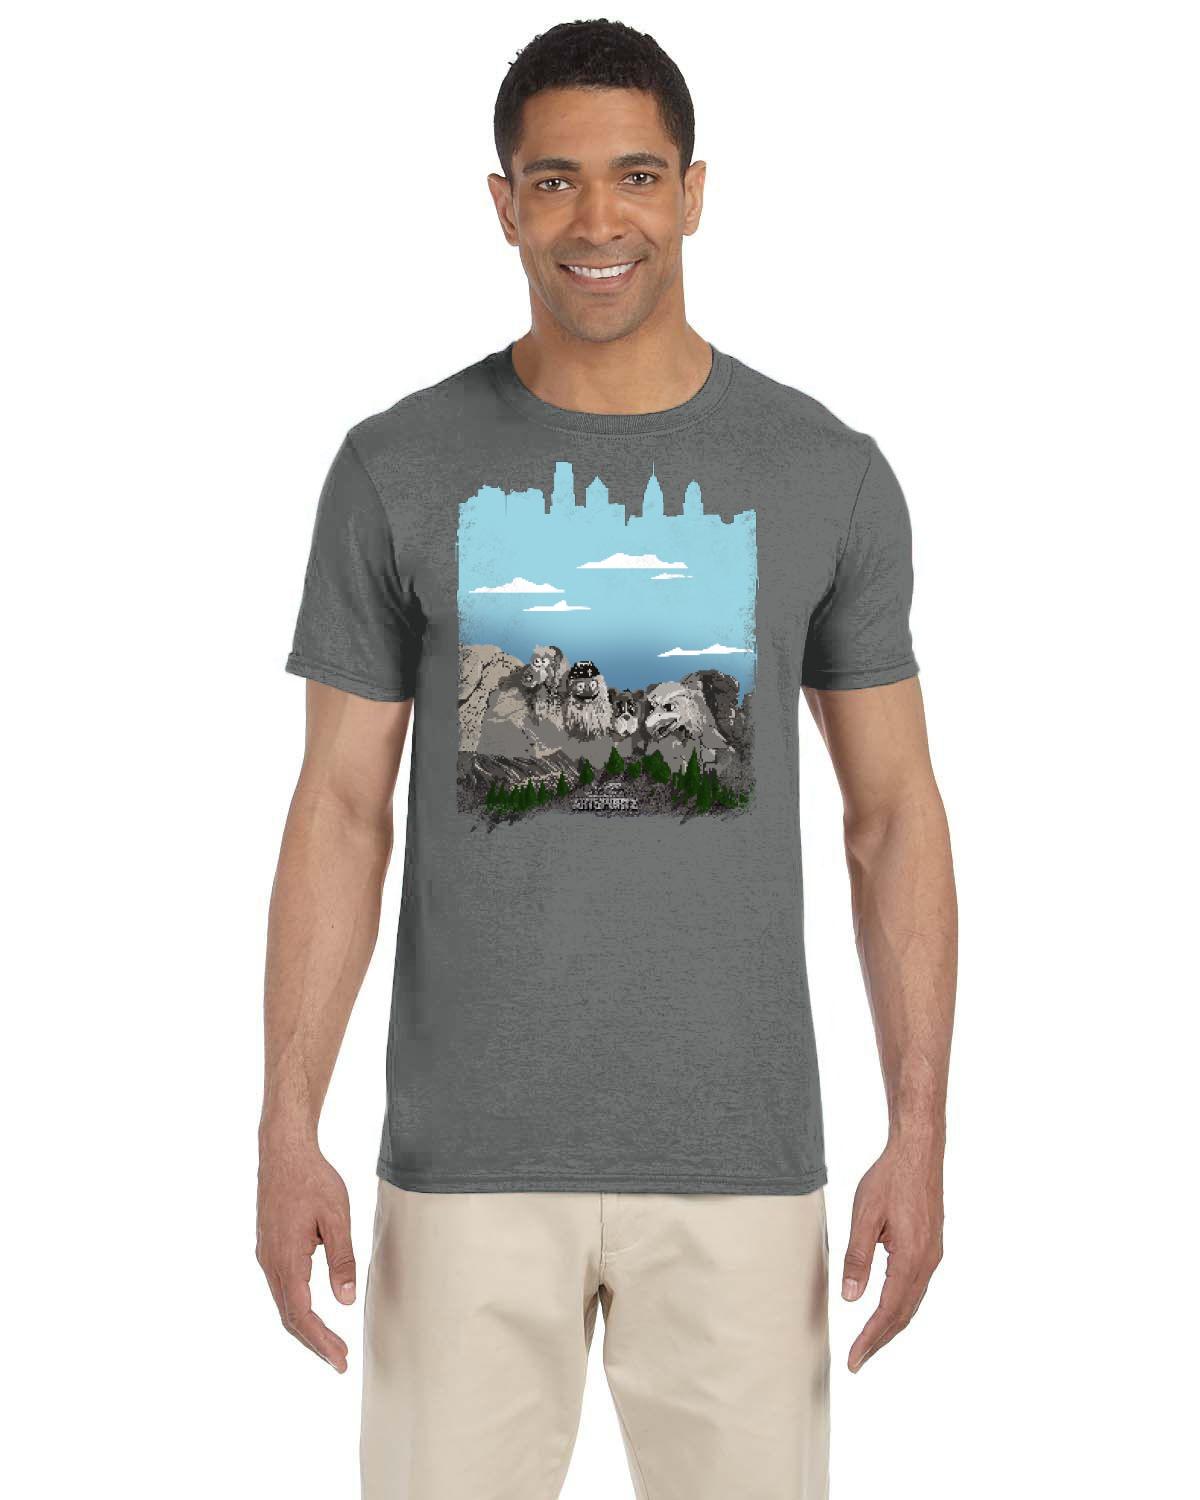 Mt Rushmore Philly (Mt Crushmore) Gildan Adult Softstyle 7.5 oz./lin. yd. T-Shirt | G640